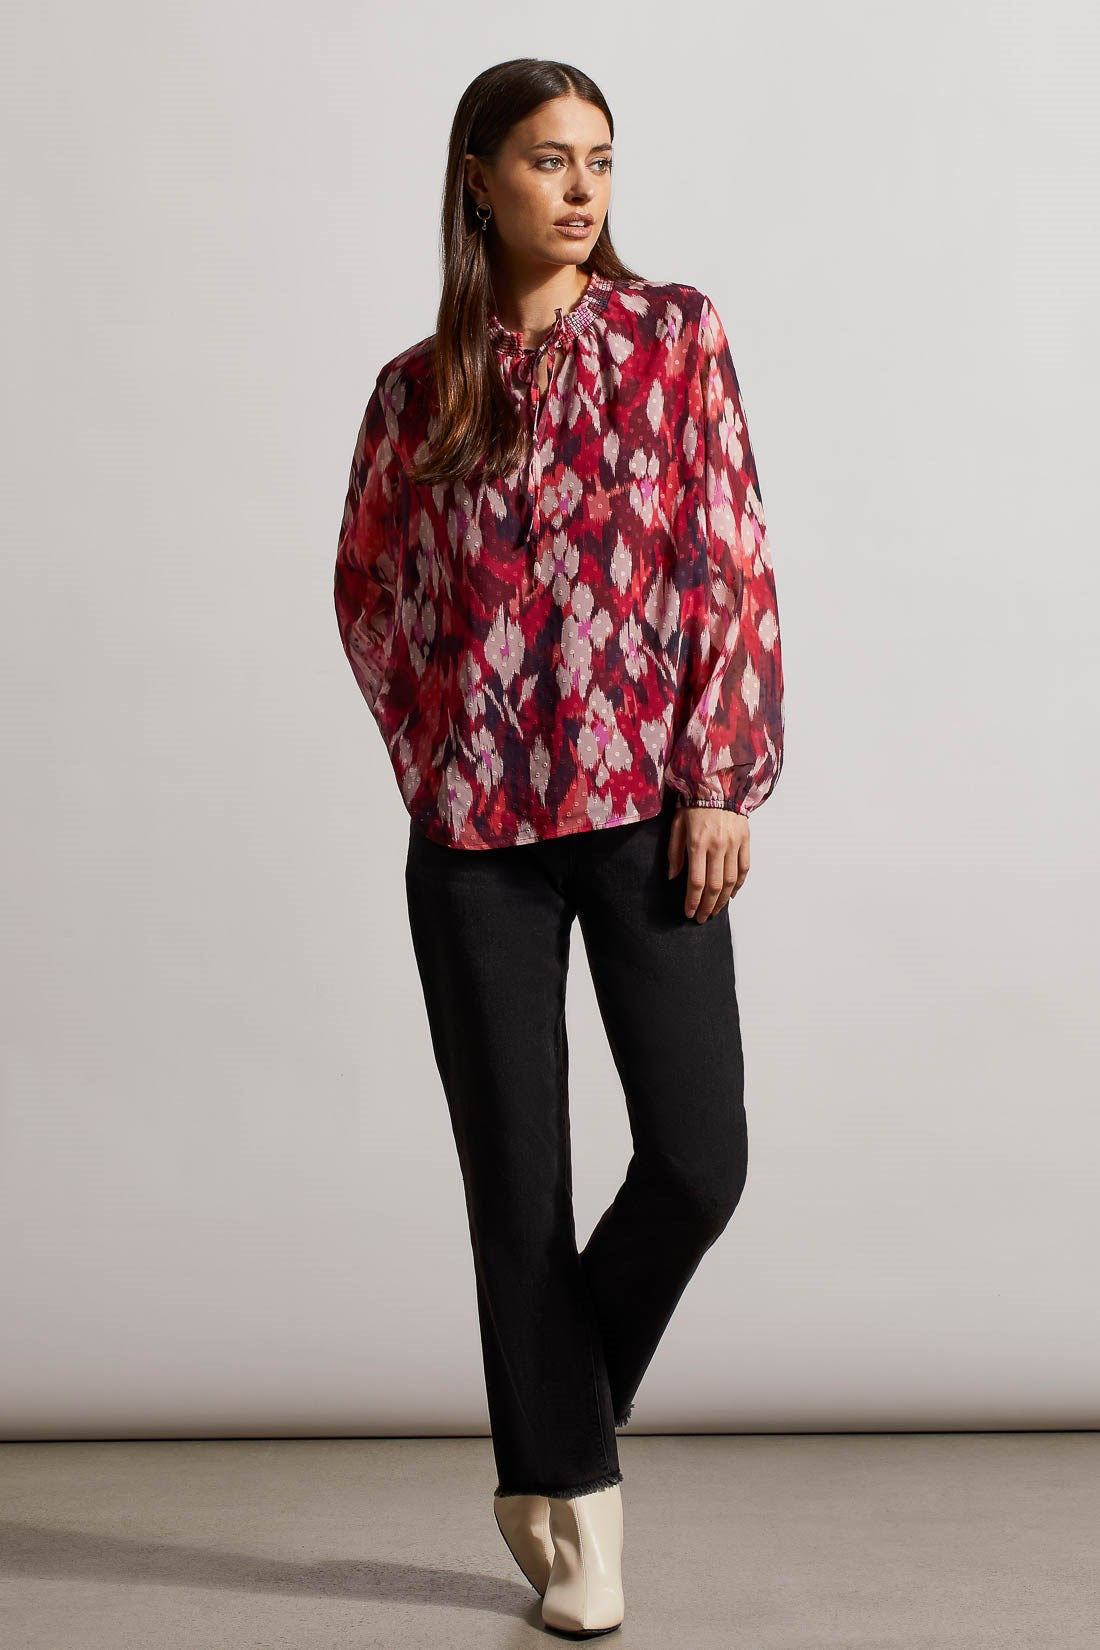 Puffy Sleeve Blouse - FINAL SALE